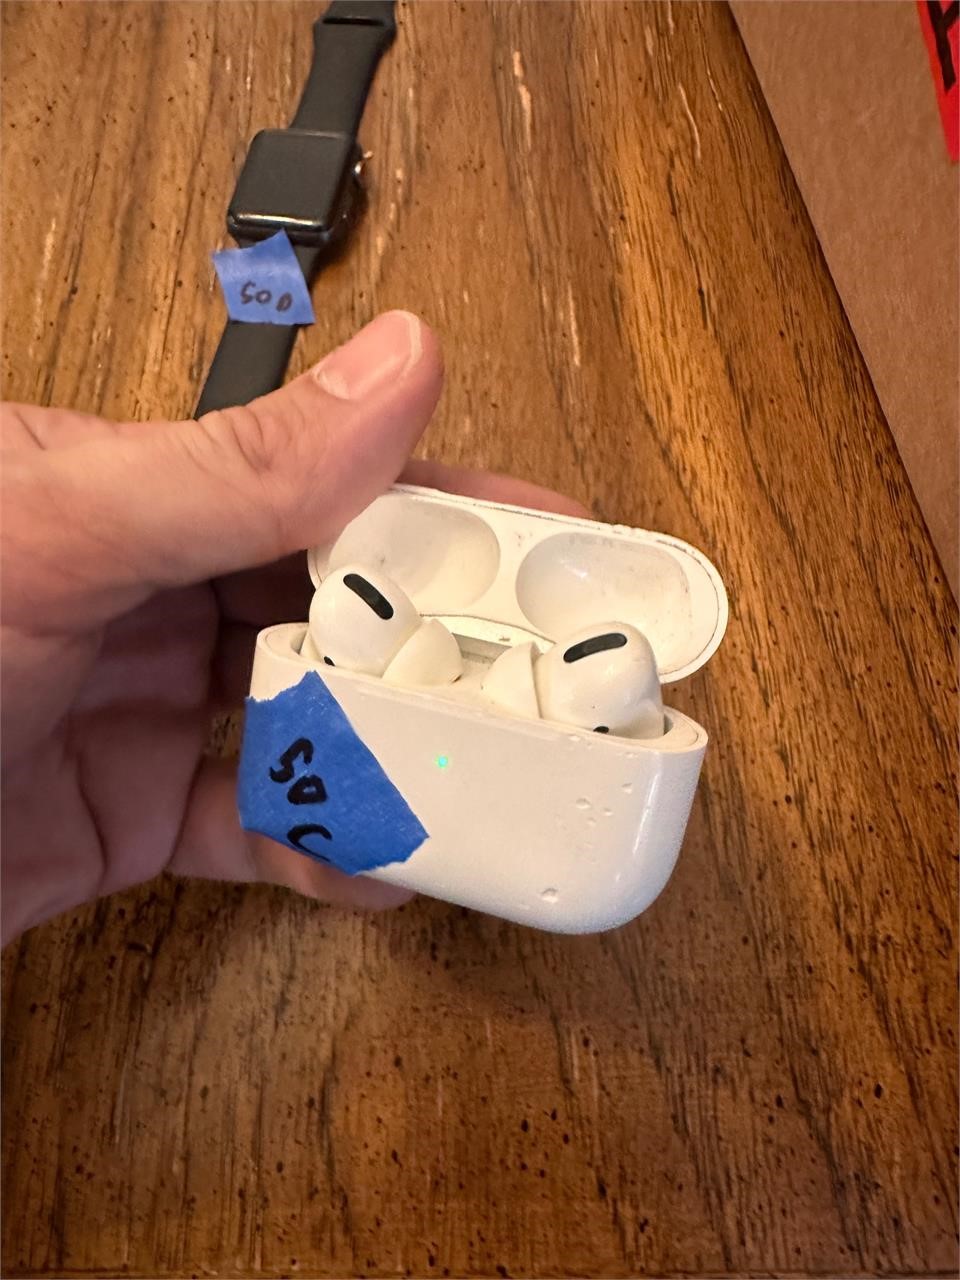 Apple AirPods Pro with case